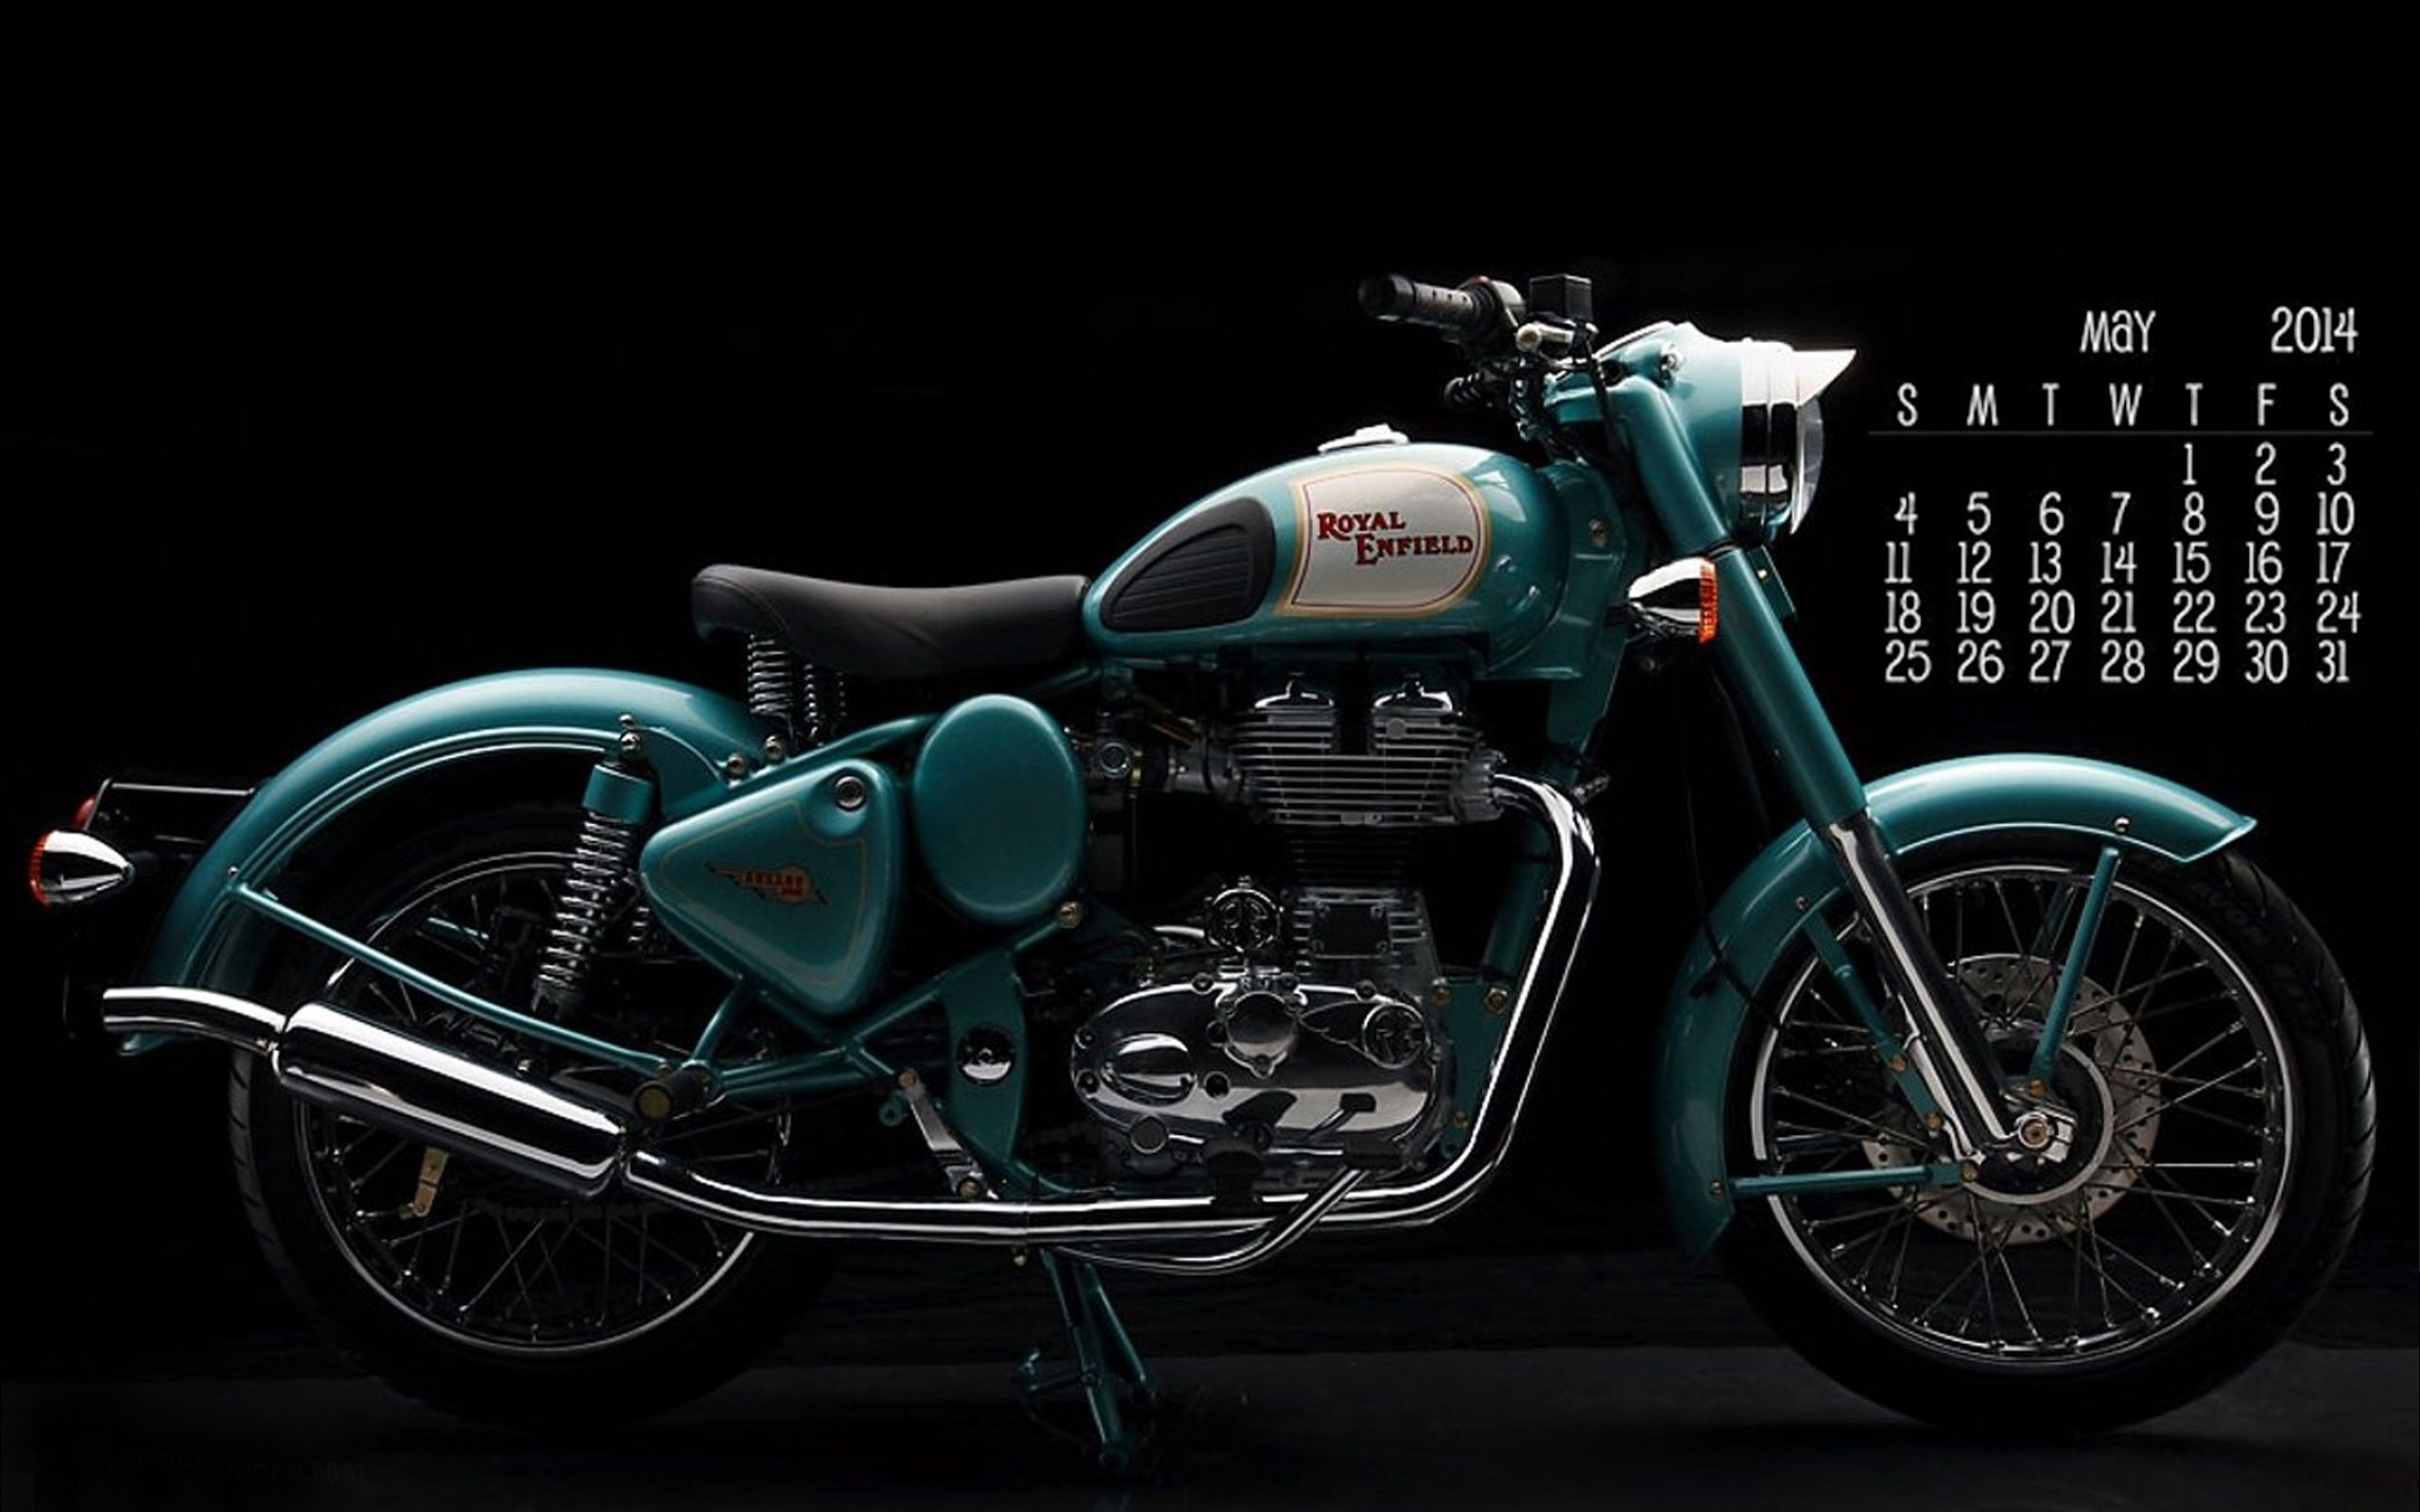 Royal Enfield May 2014 calendar HD wallpapers | Get Latest Wallpapers